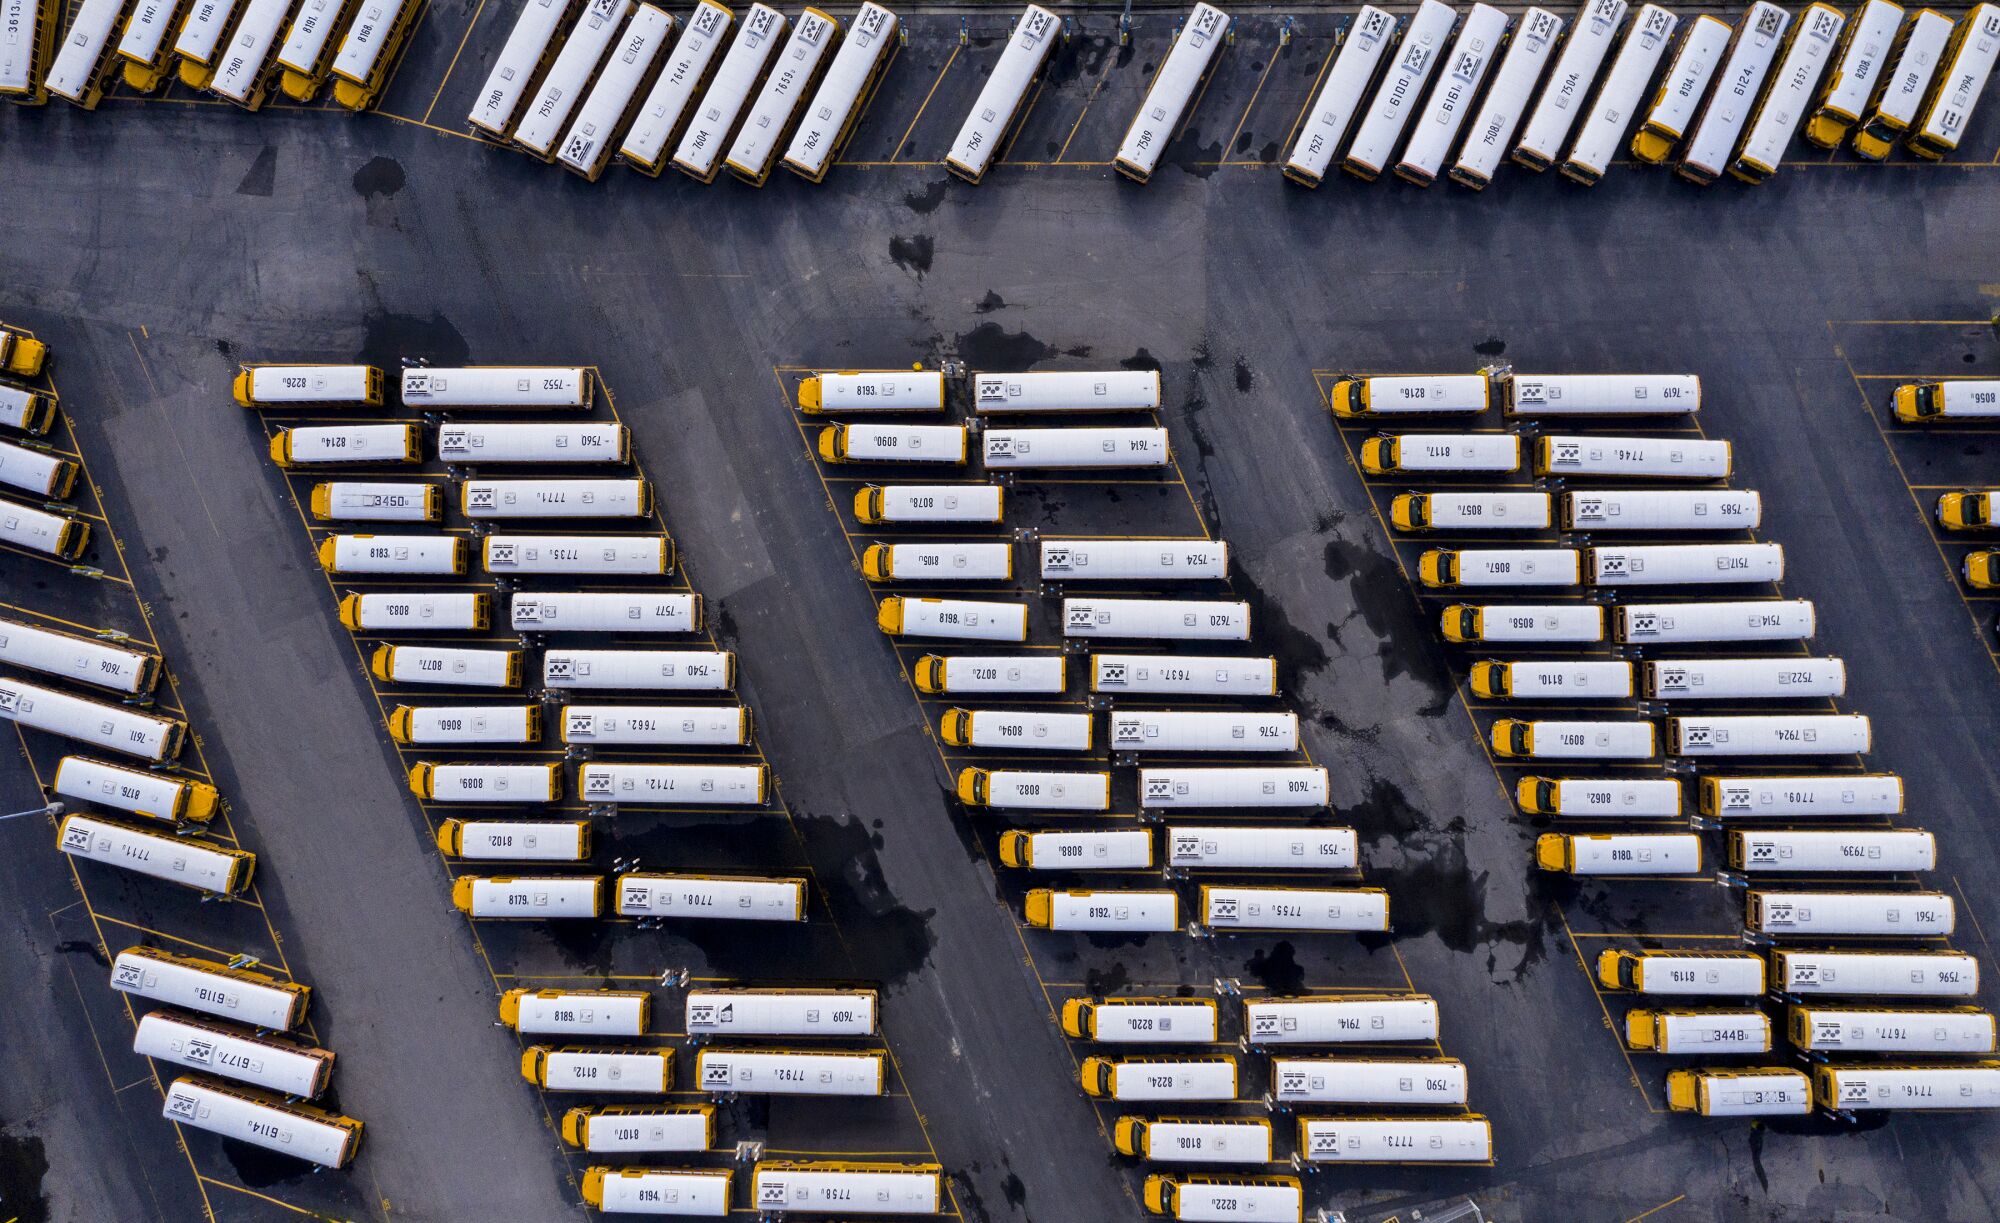 LAUSD buses sit idle in a district transportation yard in Gardena